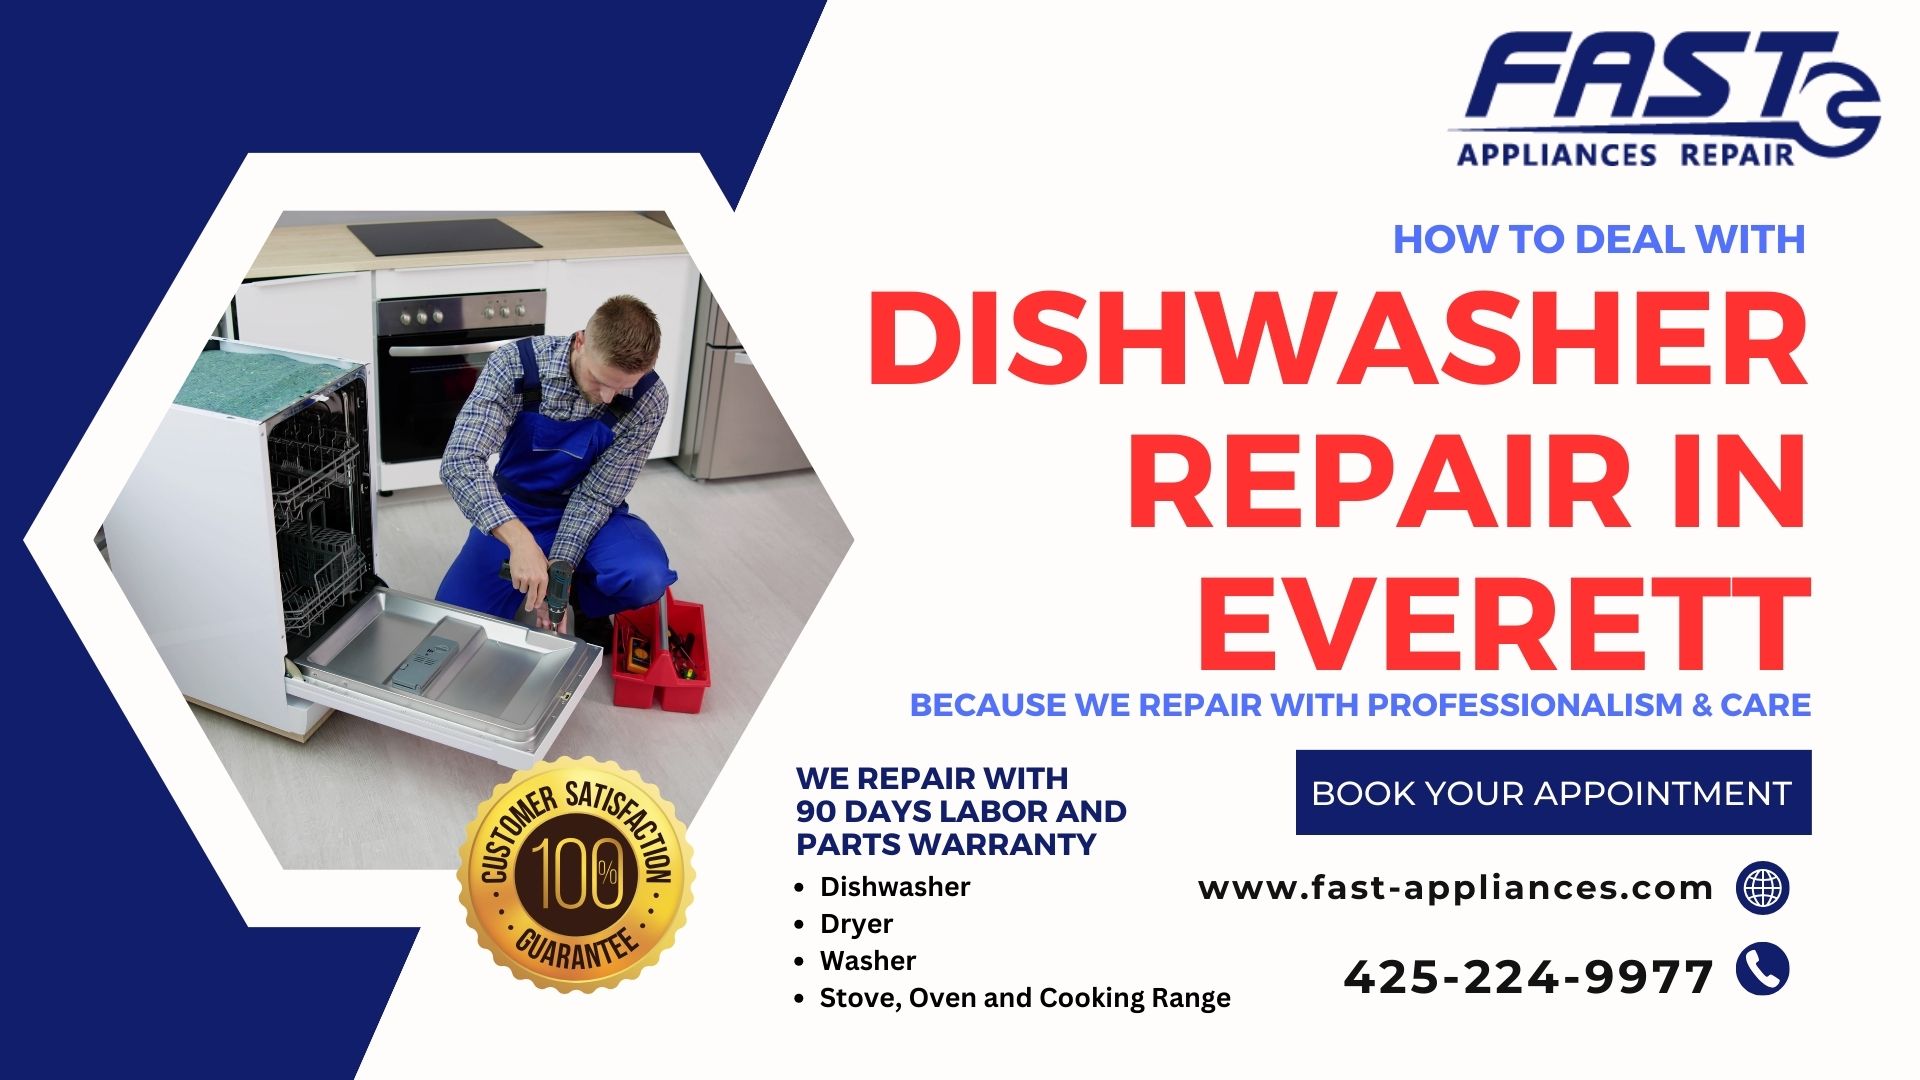 How to Deal With Dishwasher Repair in Everett by Fast Appliances Repair